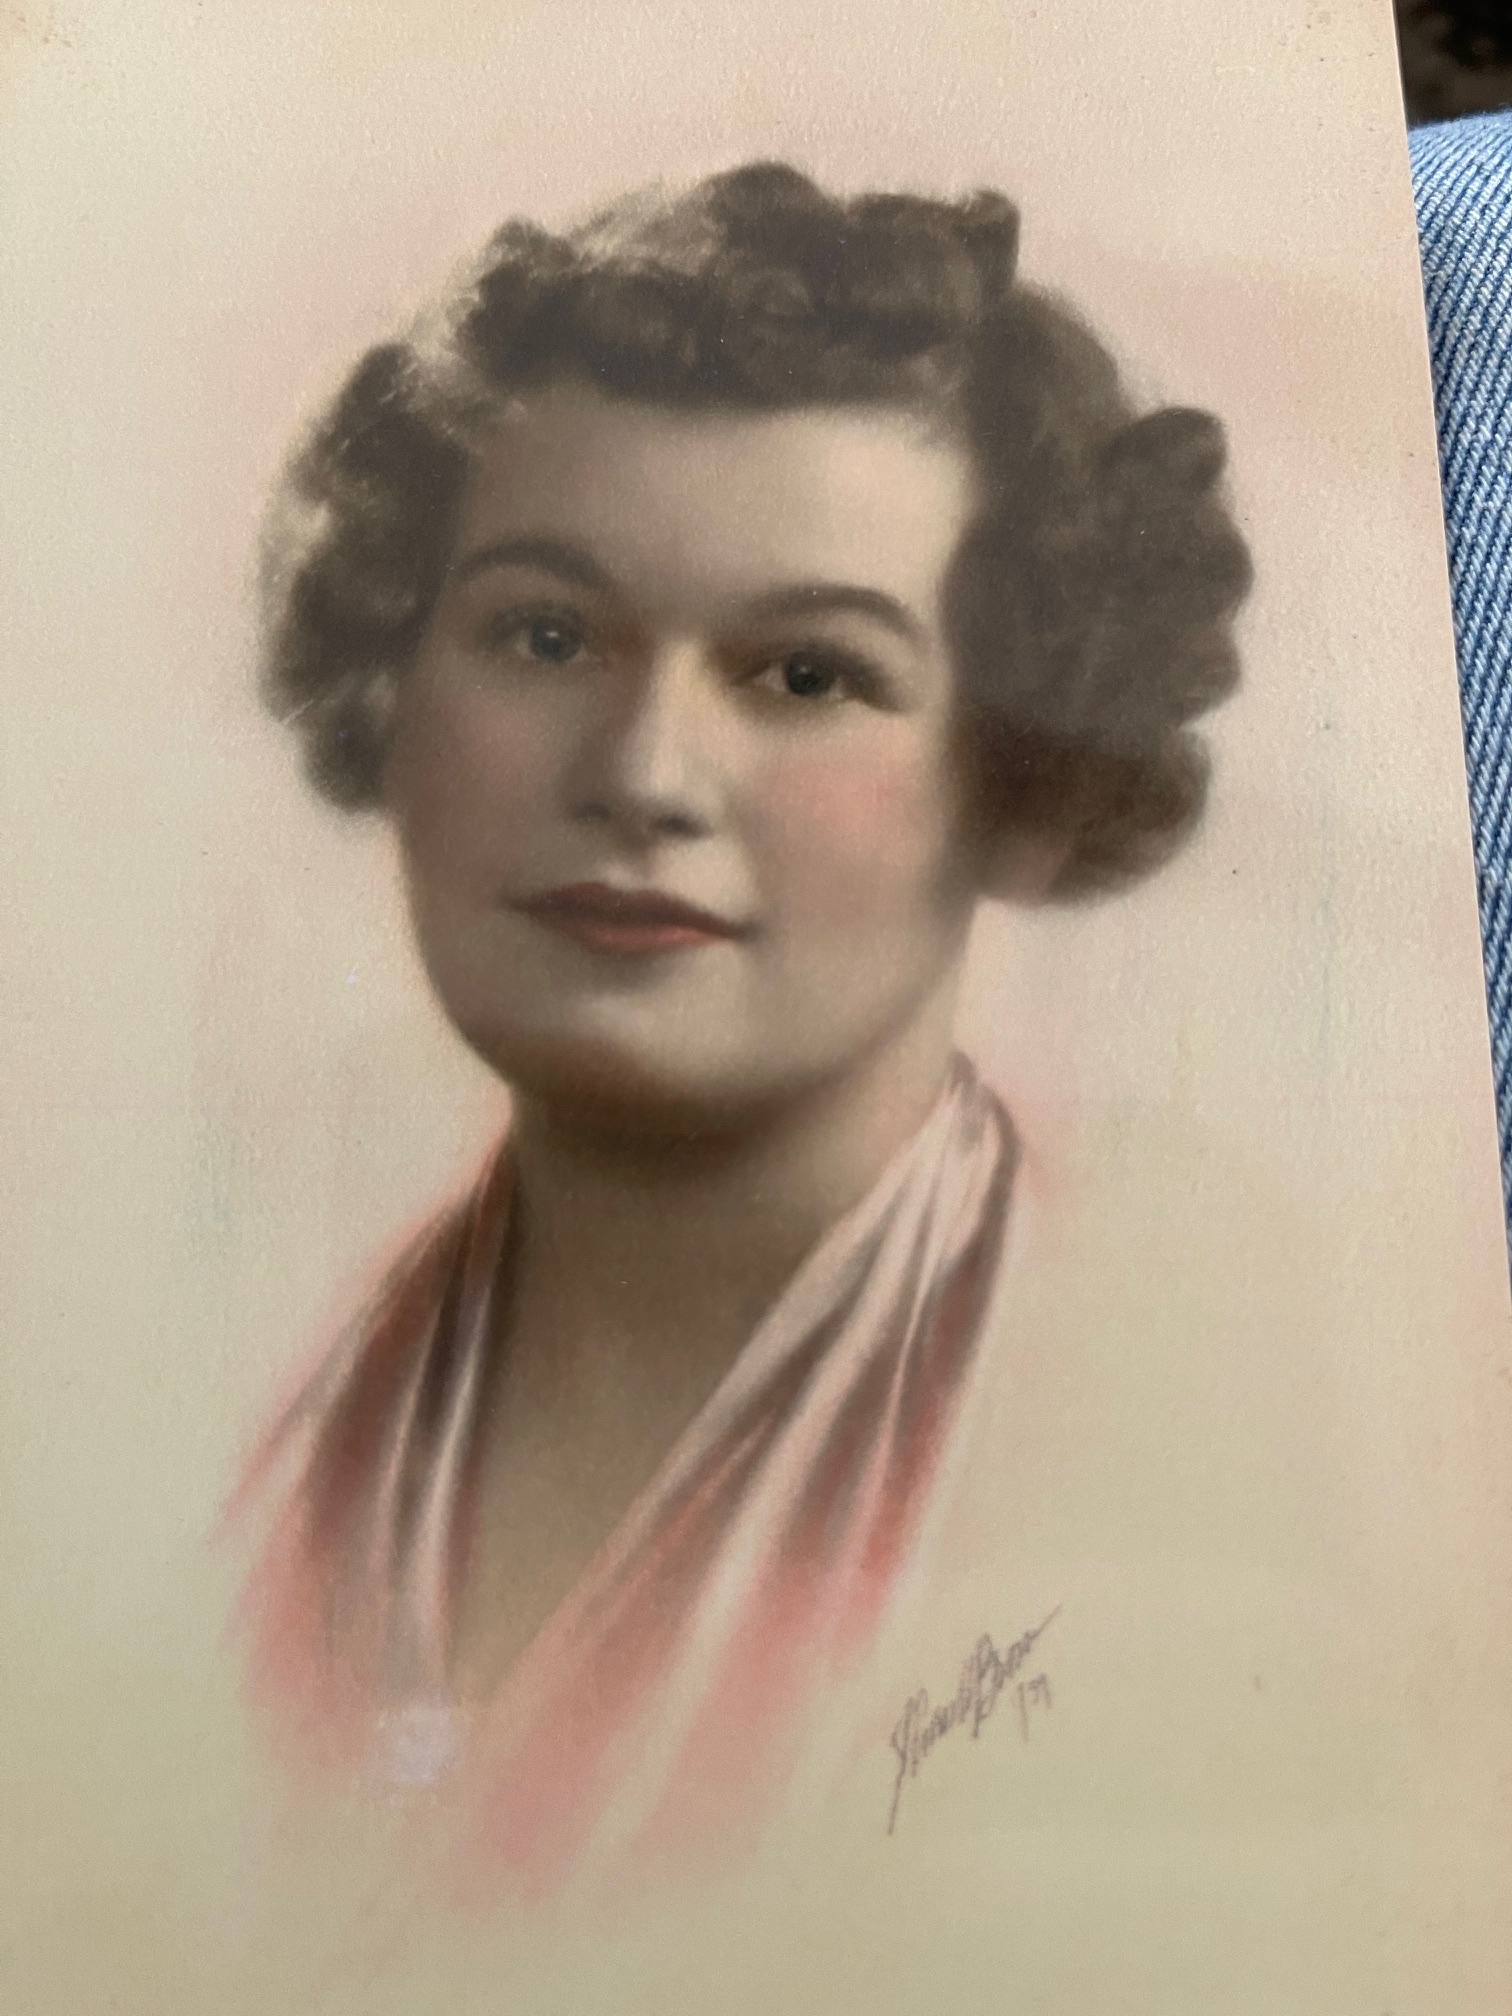 Olive (Lutz) Borgatti was a member of the Shrewsbury High School class of 1938 and went on to attend Worcester State College.